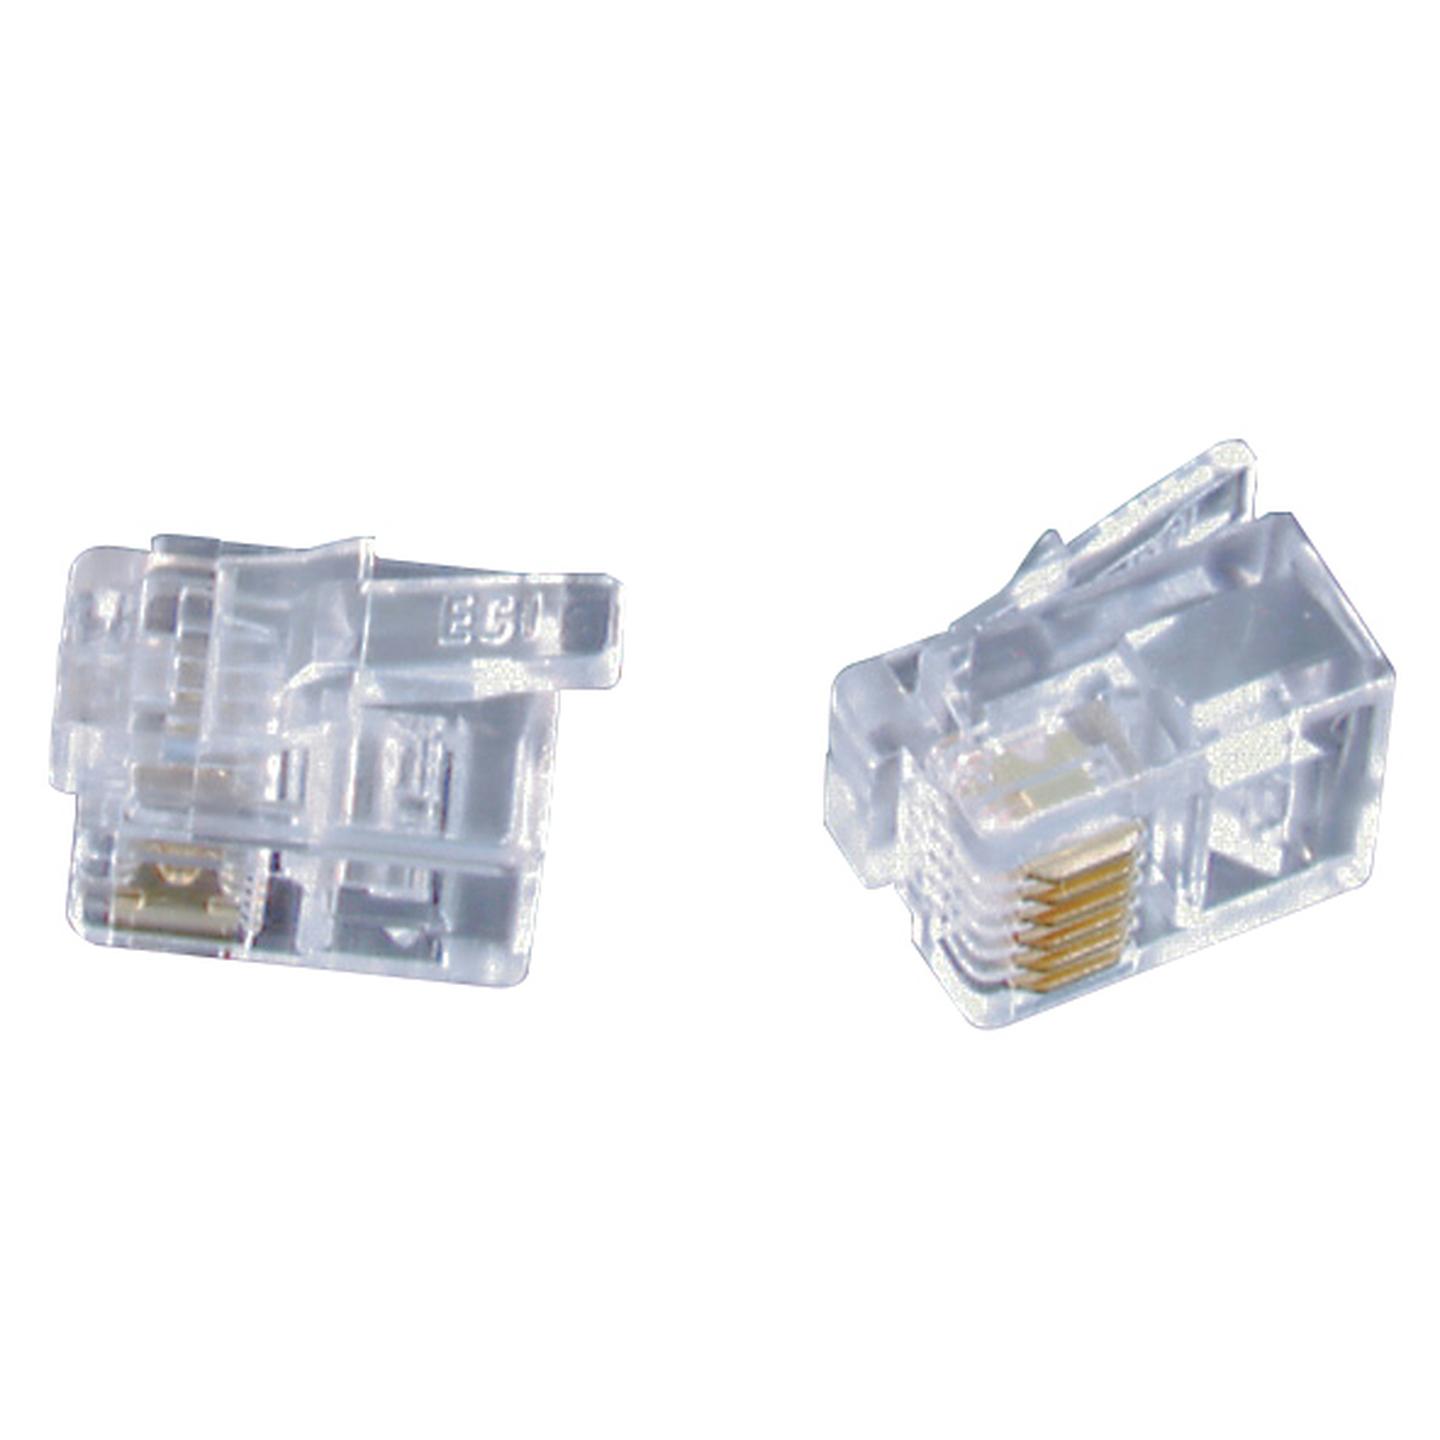 RJ12 Telephone plugs for Stranded Cable - Pack of 5